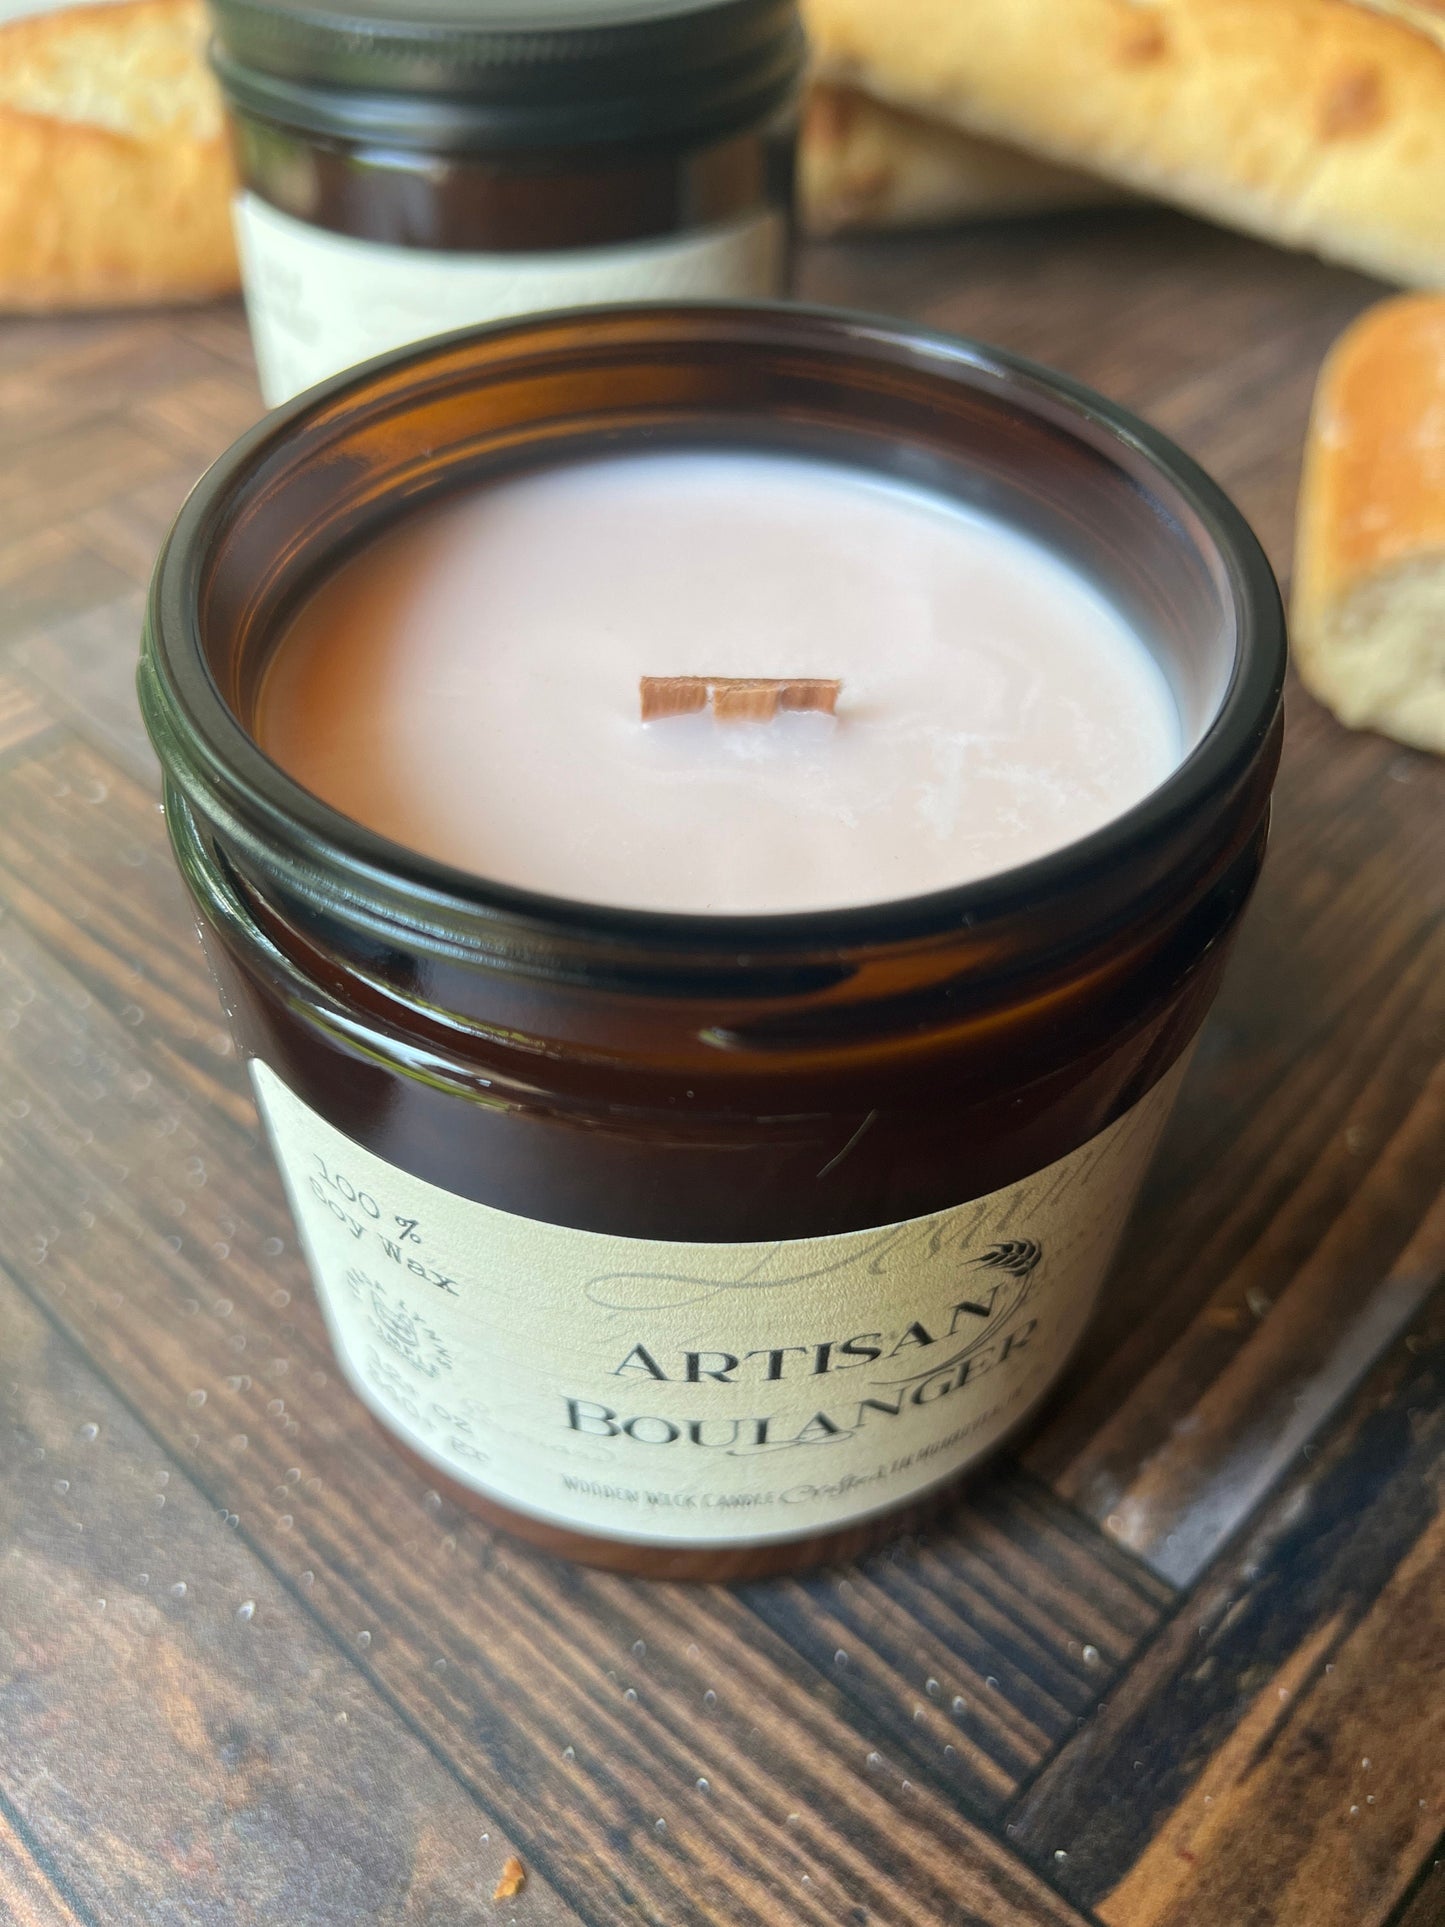 Artisan Boulanger - French Bread Scented Soy Wax Candle with Wooden Wick